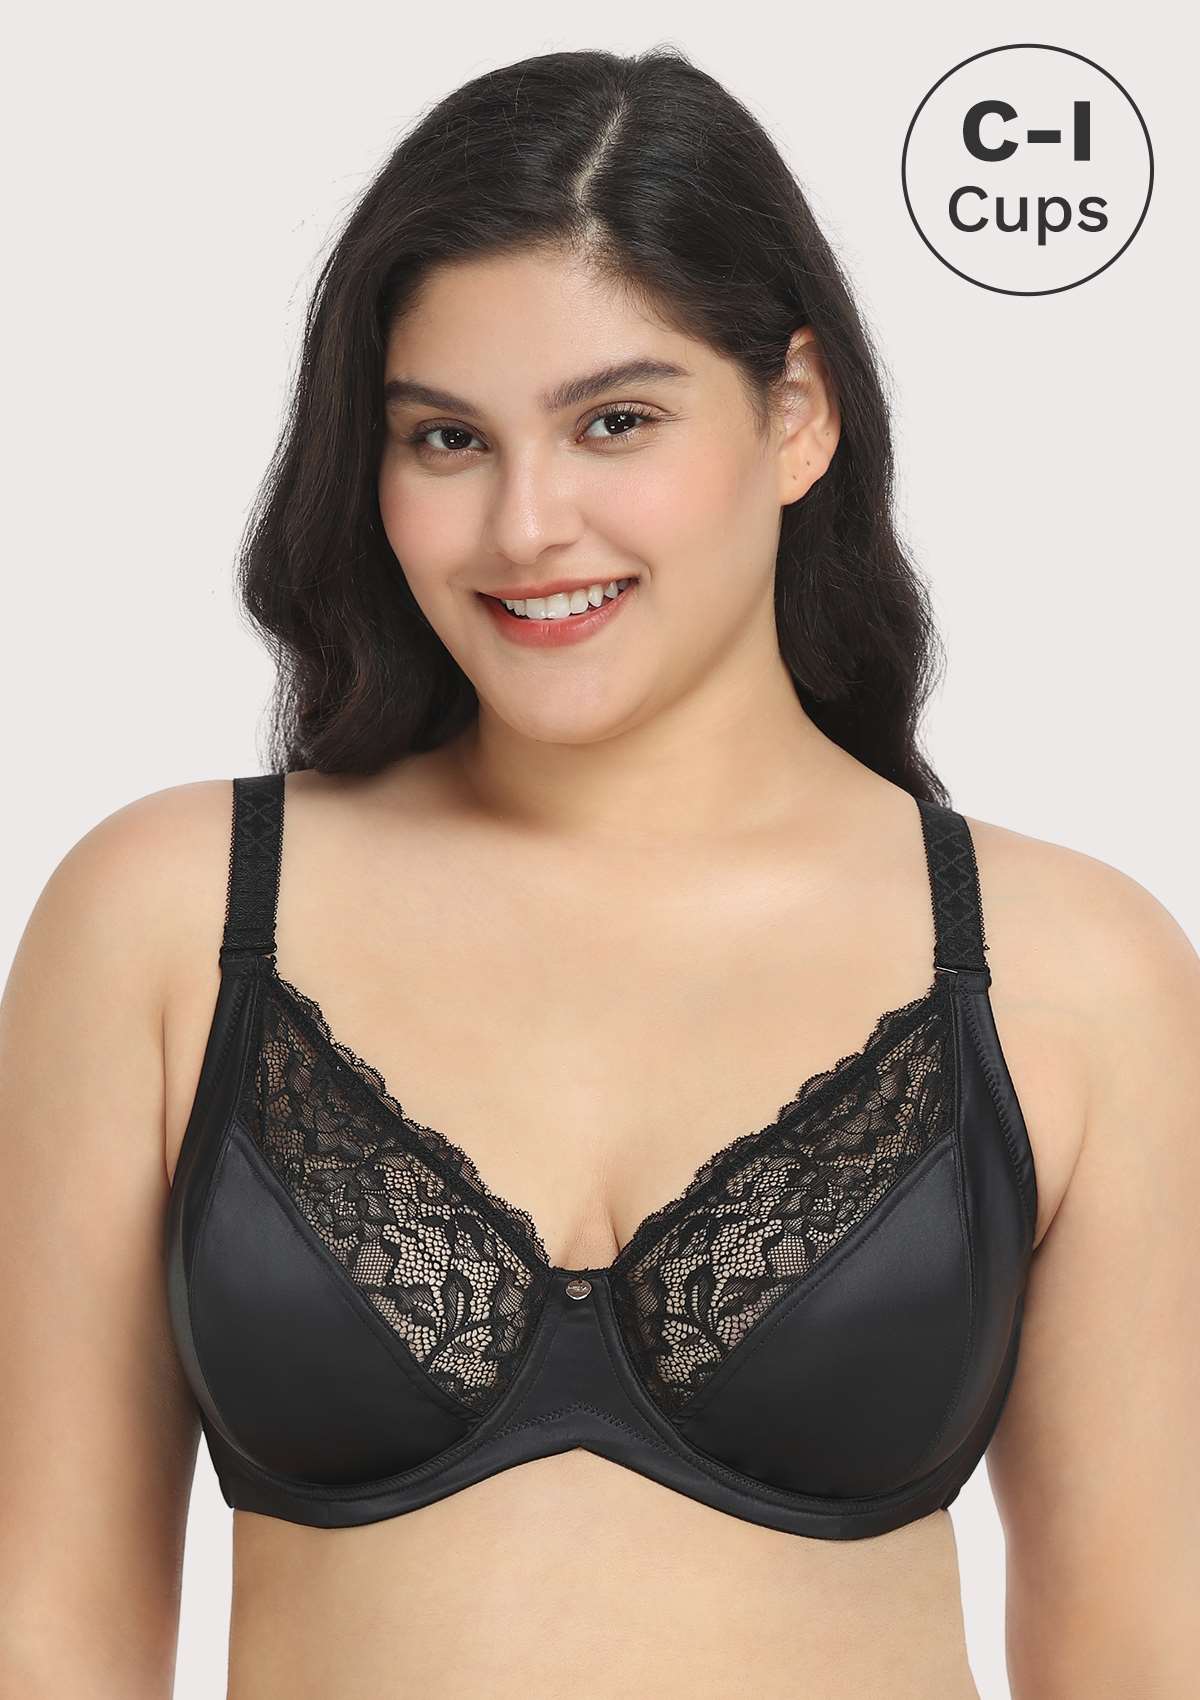 HSIA Foxy Satin Silky Full Coverage Underwire Bra With Floral Lace Trim - Black / 34 / C